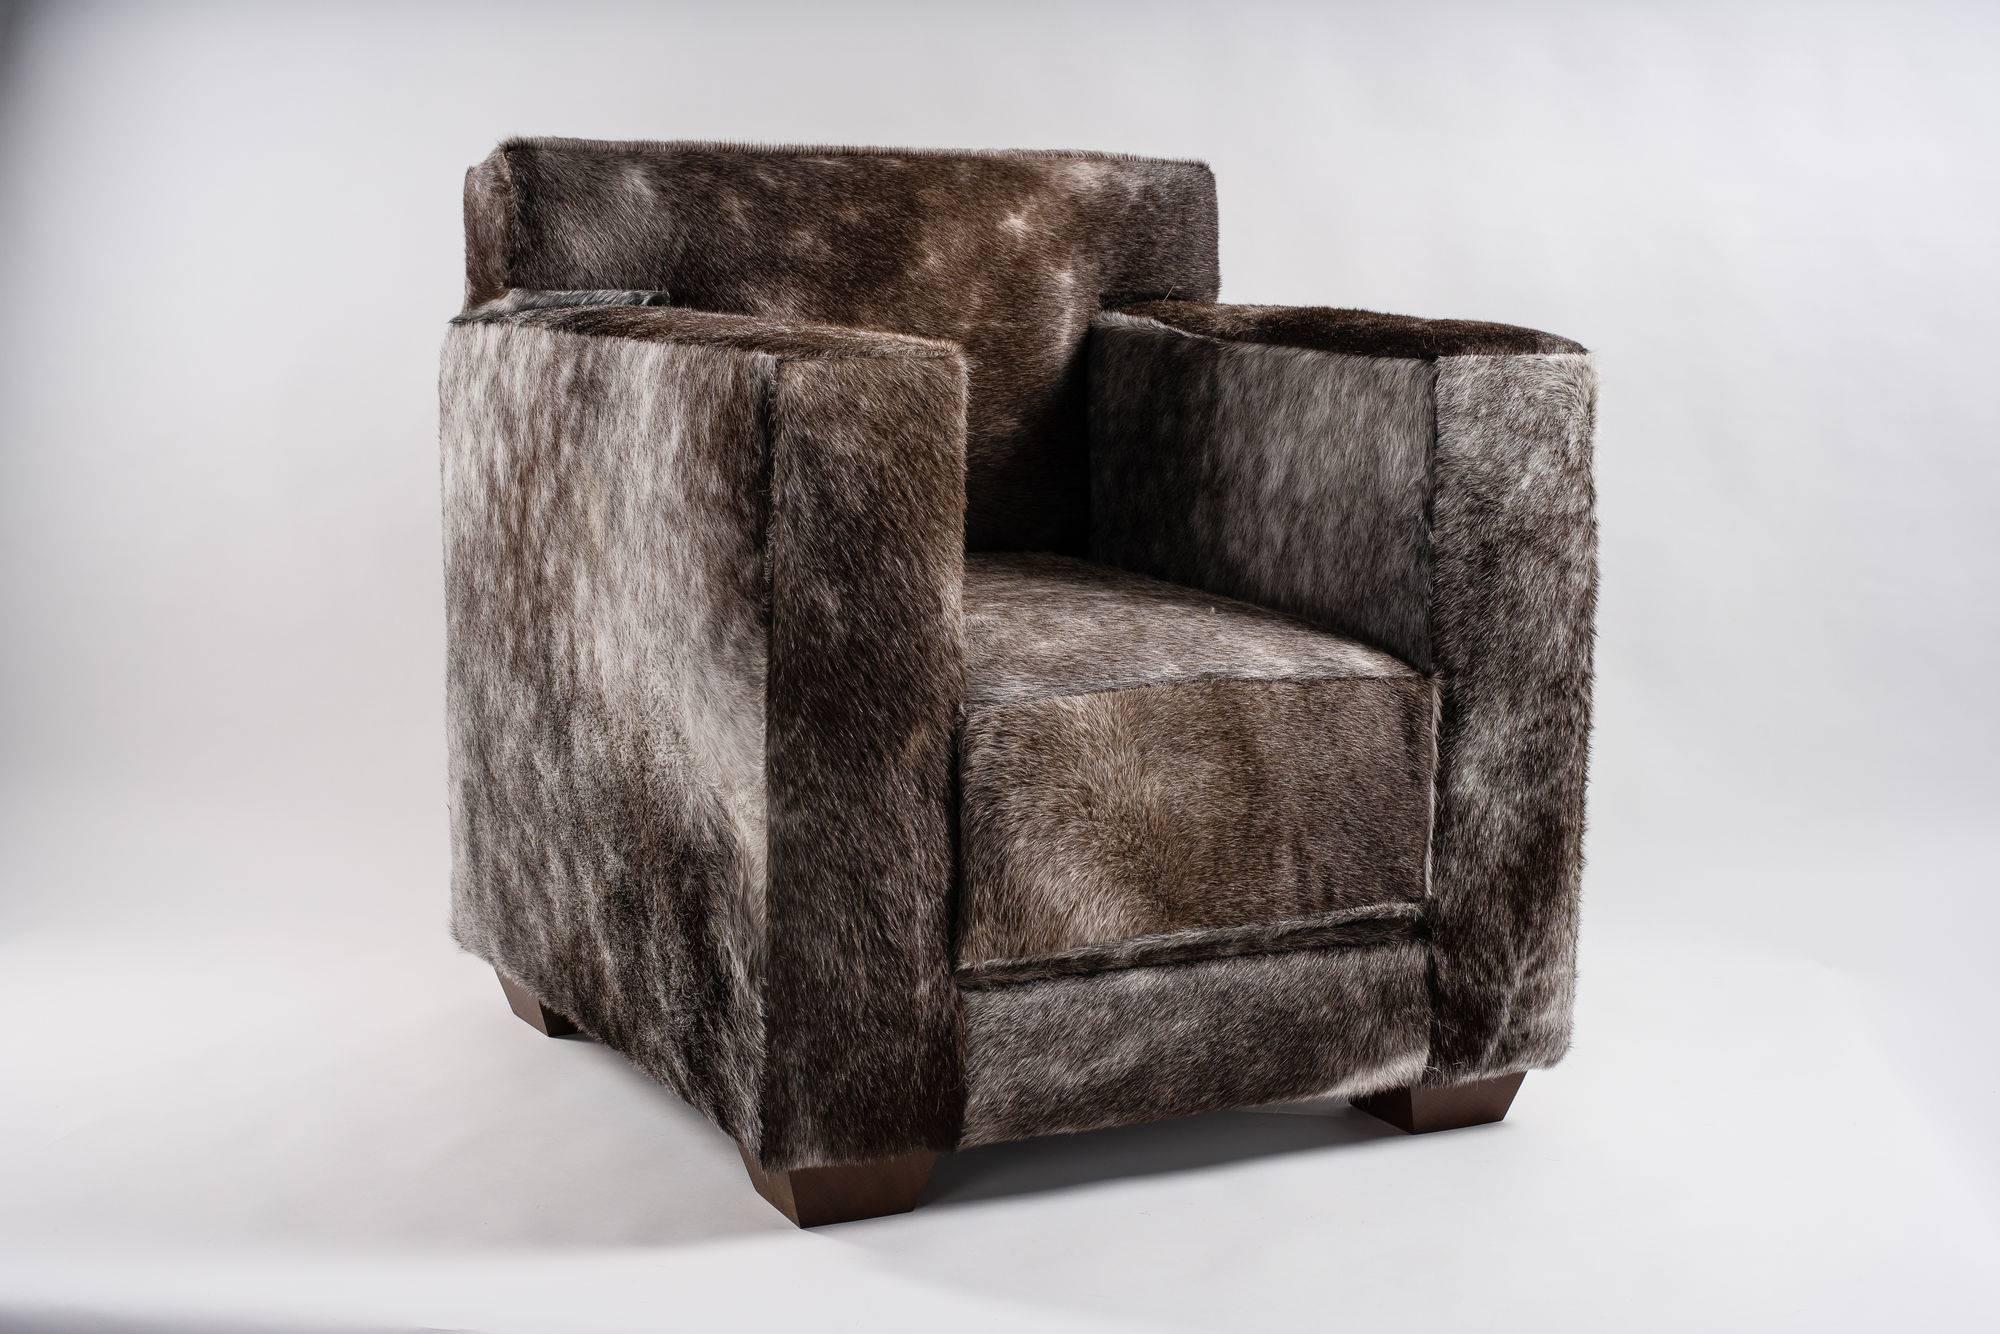 Hand-Crafted Pair of Luxury Armchairs, Pony Upholstery